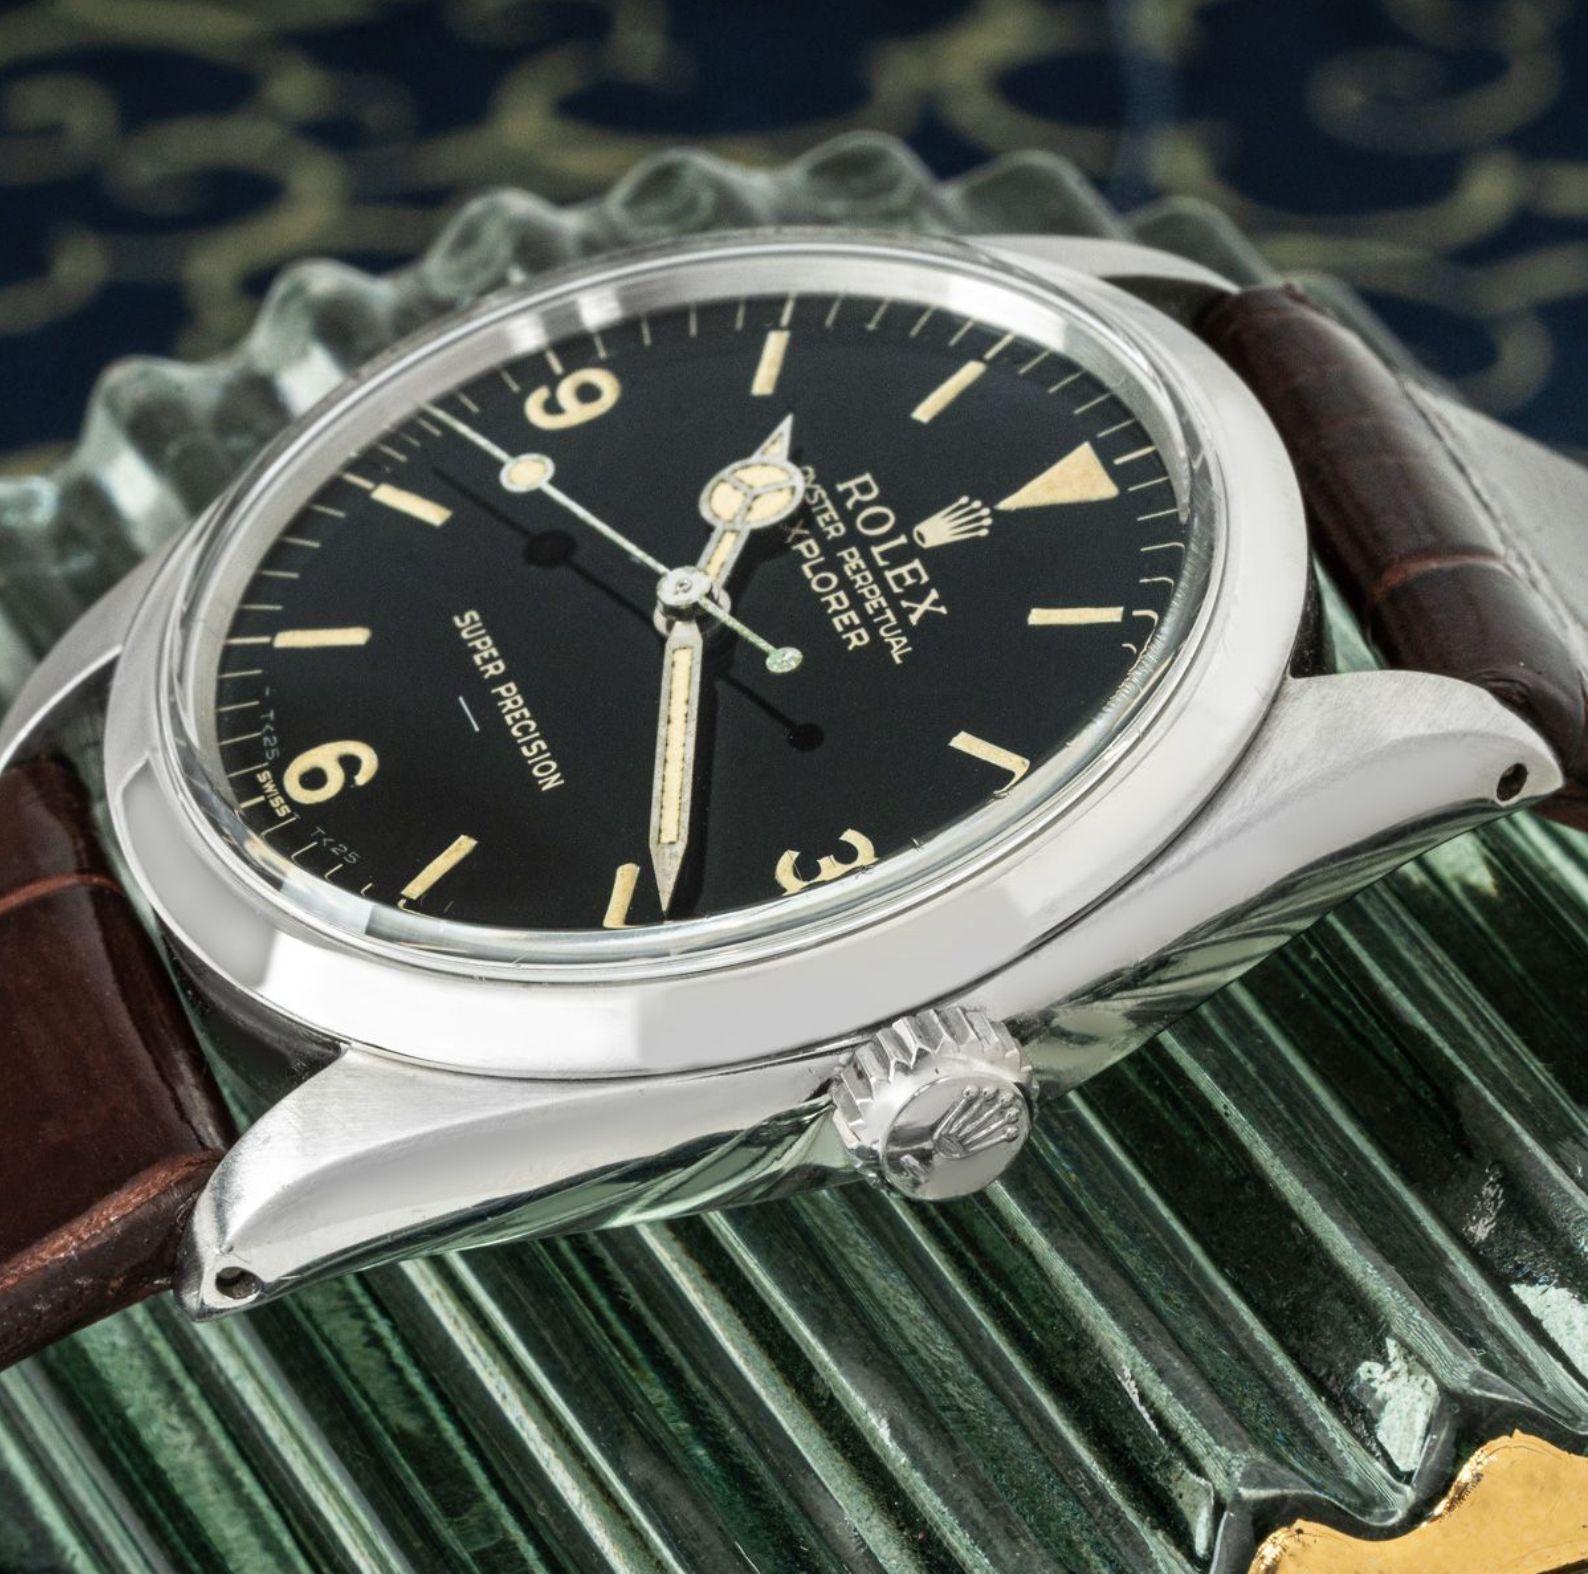 A vintage Rolex Explorer in stainless steel. Featuring a black gilt dial with arabic numbers, a distinctive 'super precision' underlined at 6 o'clock and a steel bezel. The watch is fitted with a plastic glass, a self-winding automatic movement and